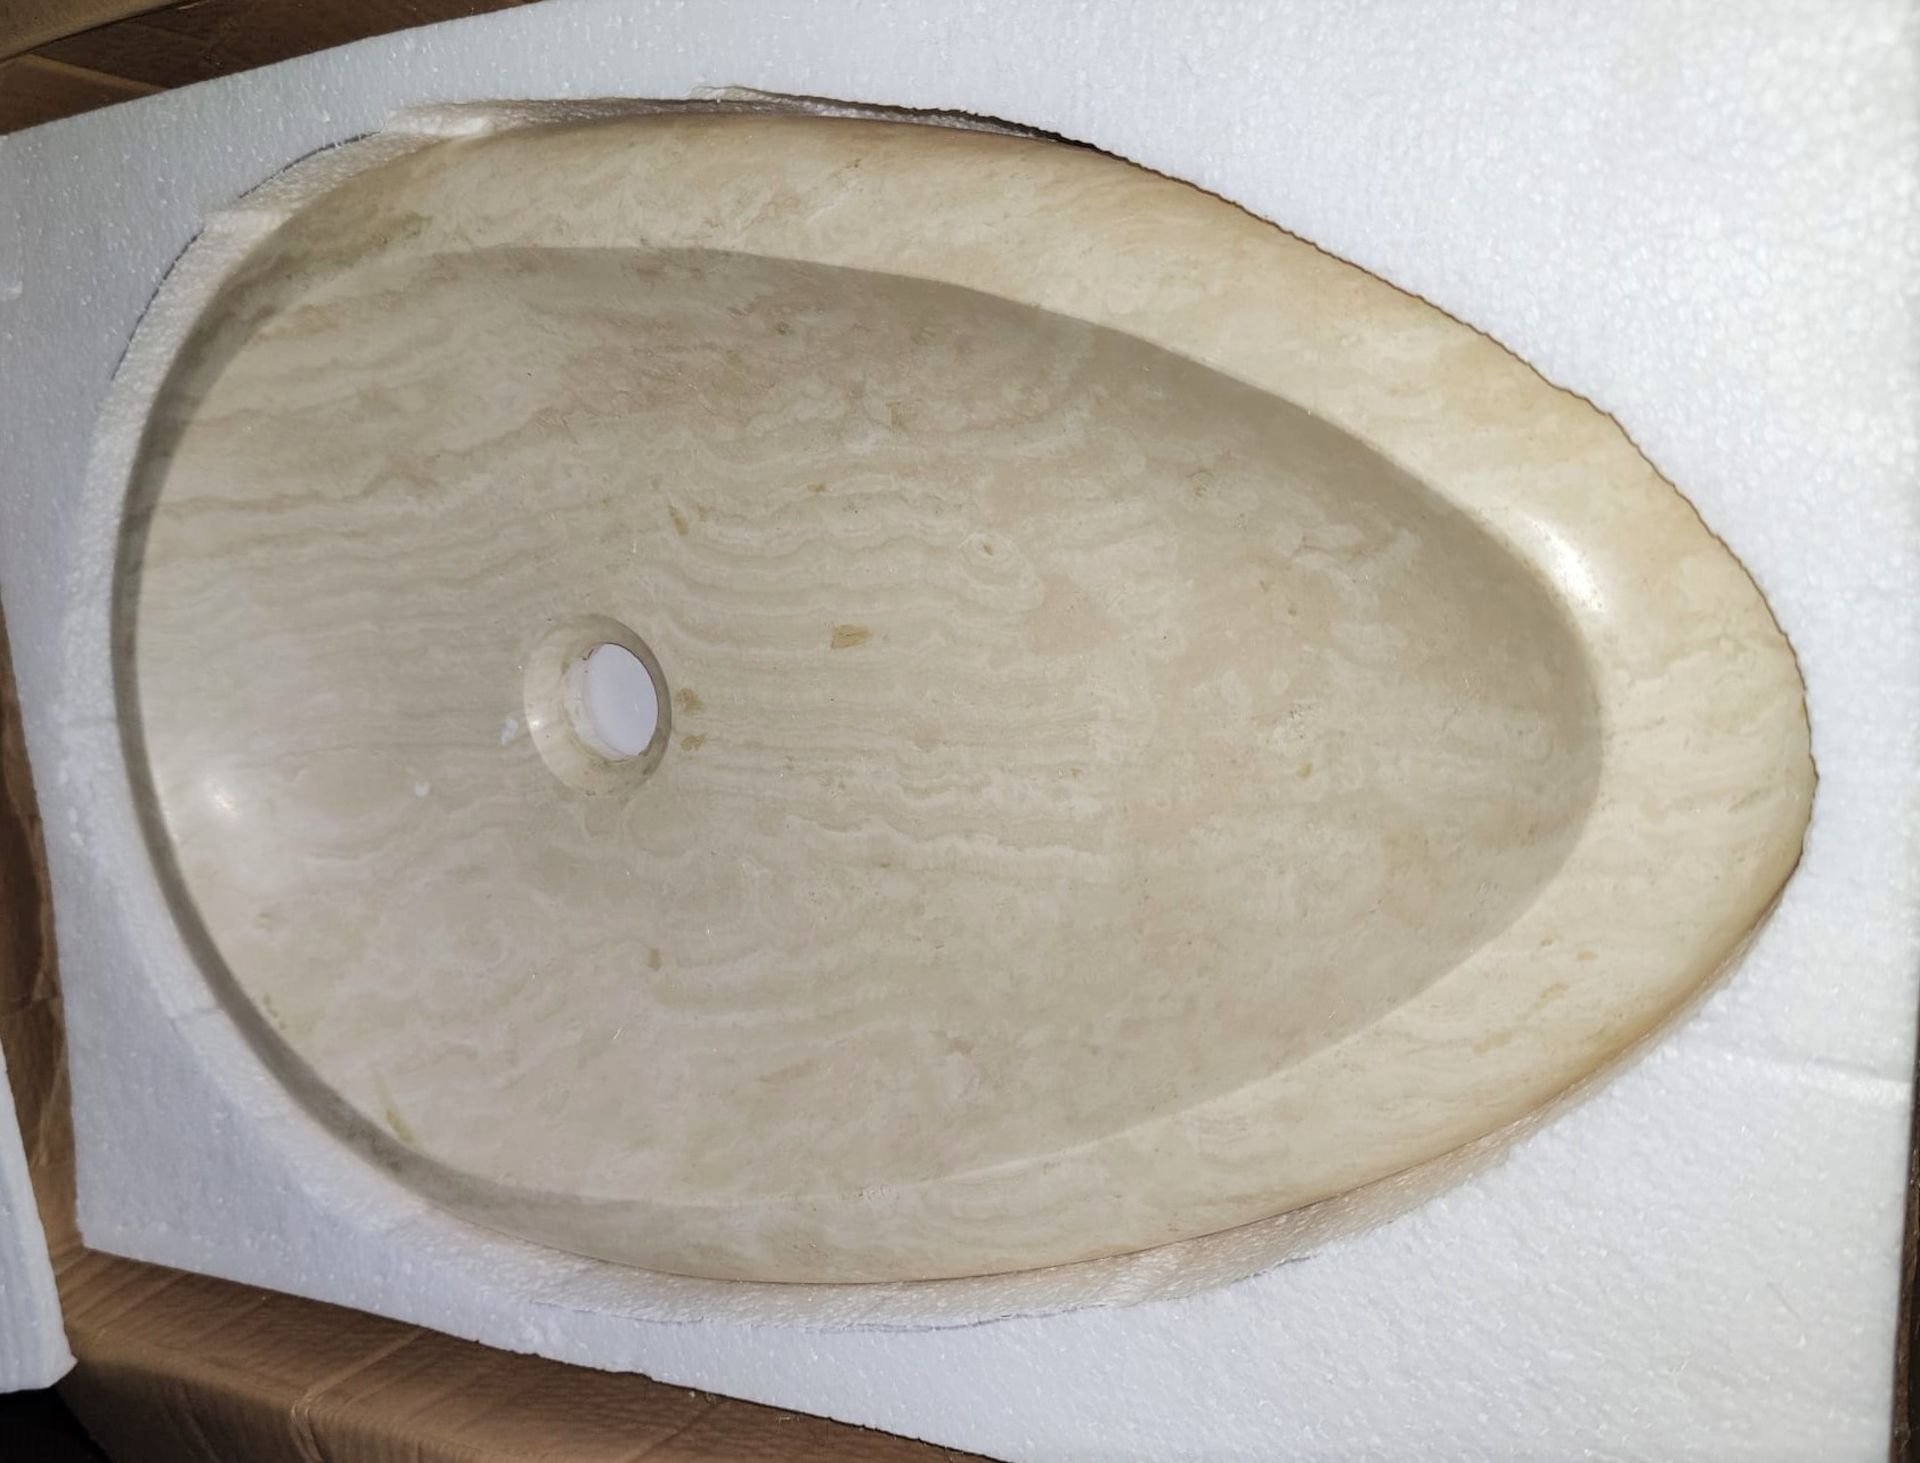 1 x Stonearth 'Pebble' Beige Travertine Stone Countertop Sink Basin - New Boxed Stock - RRP £560 - - Image 3 of 3